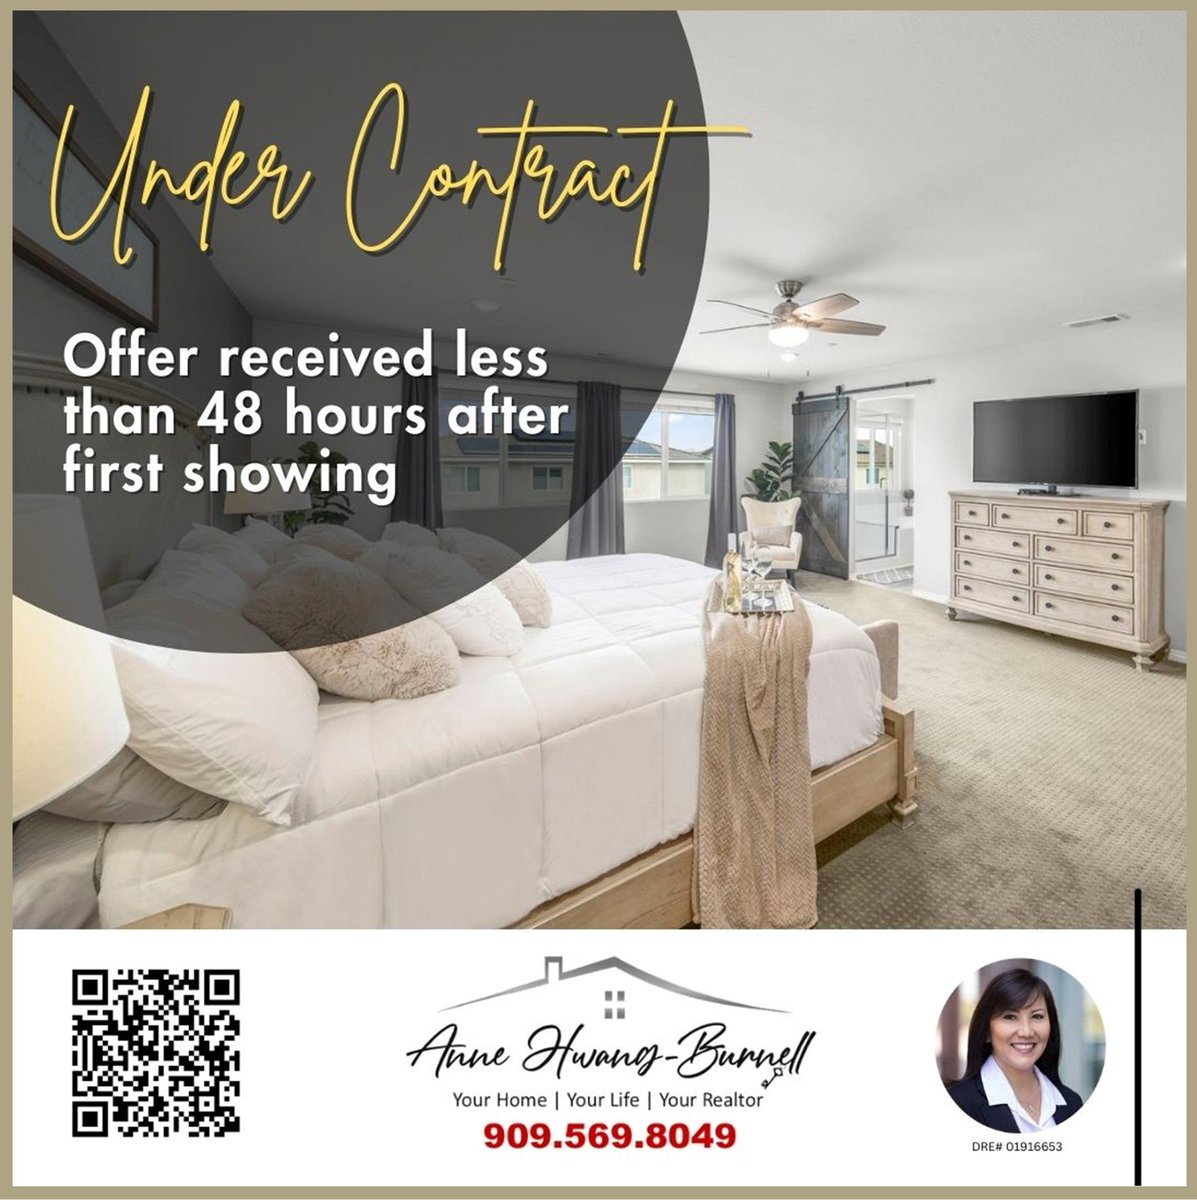 We're officially under contract—offer received in less than 48 hours after the first showing! 🎉🔑 

#annehwangburnellrealtor #stagingsells #jurupavalleyhomeforsale #RealEstateSuccess #UnderContract #QuickSale #chinohillsrealtor #listingagent